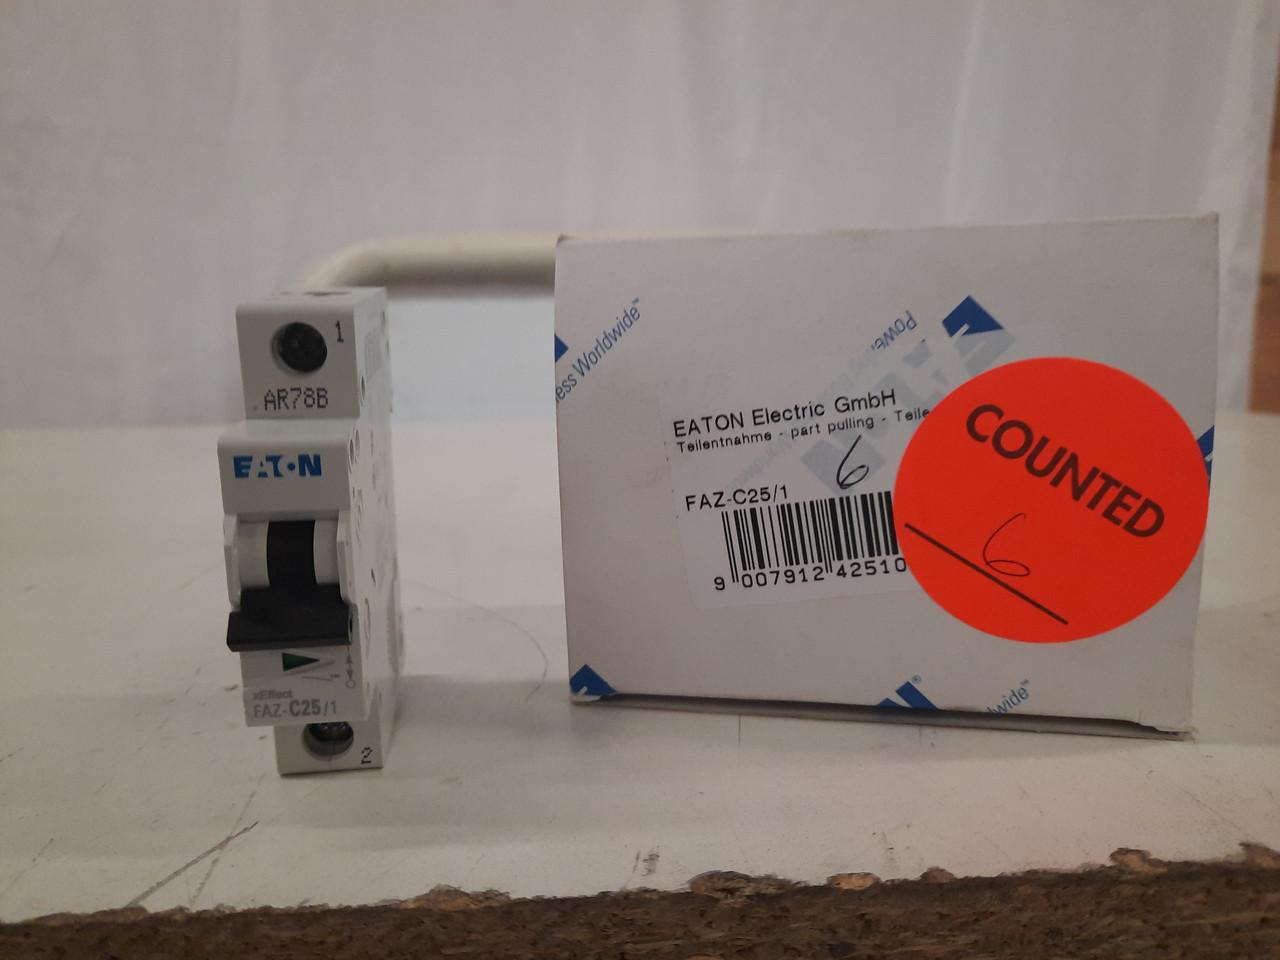 Eaton FAZ-C25/1 277/480 VAC 50/60 Hz, 25 A, 1-Pole, 10 kA, 5 to 10 x Rated Current, Line/Load Terminal, DIN Rail Mount, Standard Packaging, C-Curve, Current Limiting, Thermal Magnetic, Supplementary Protector